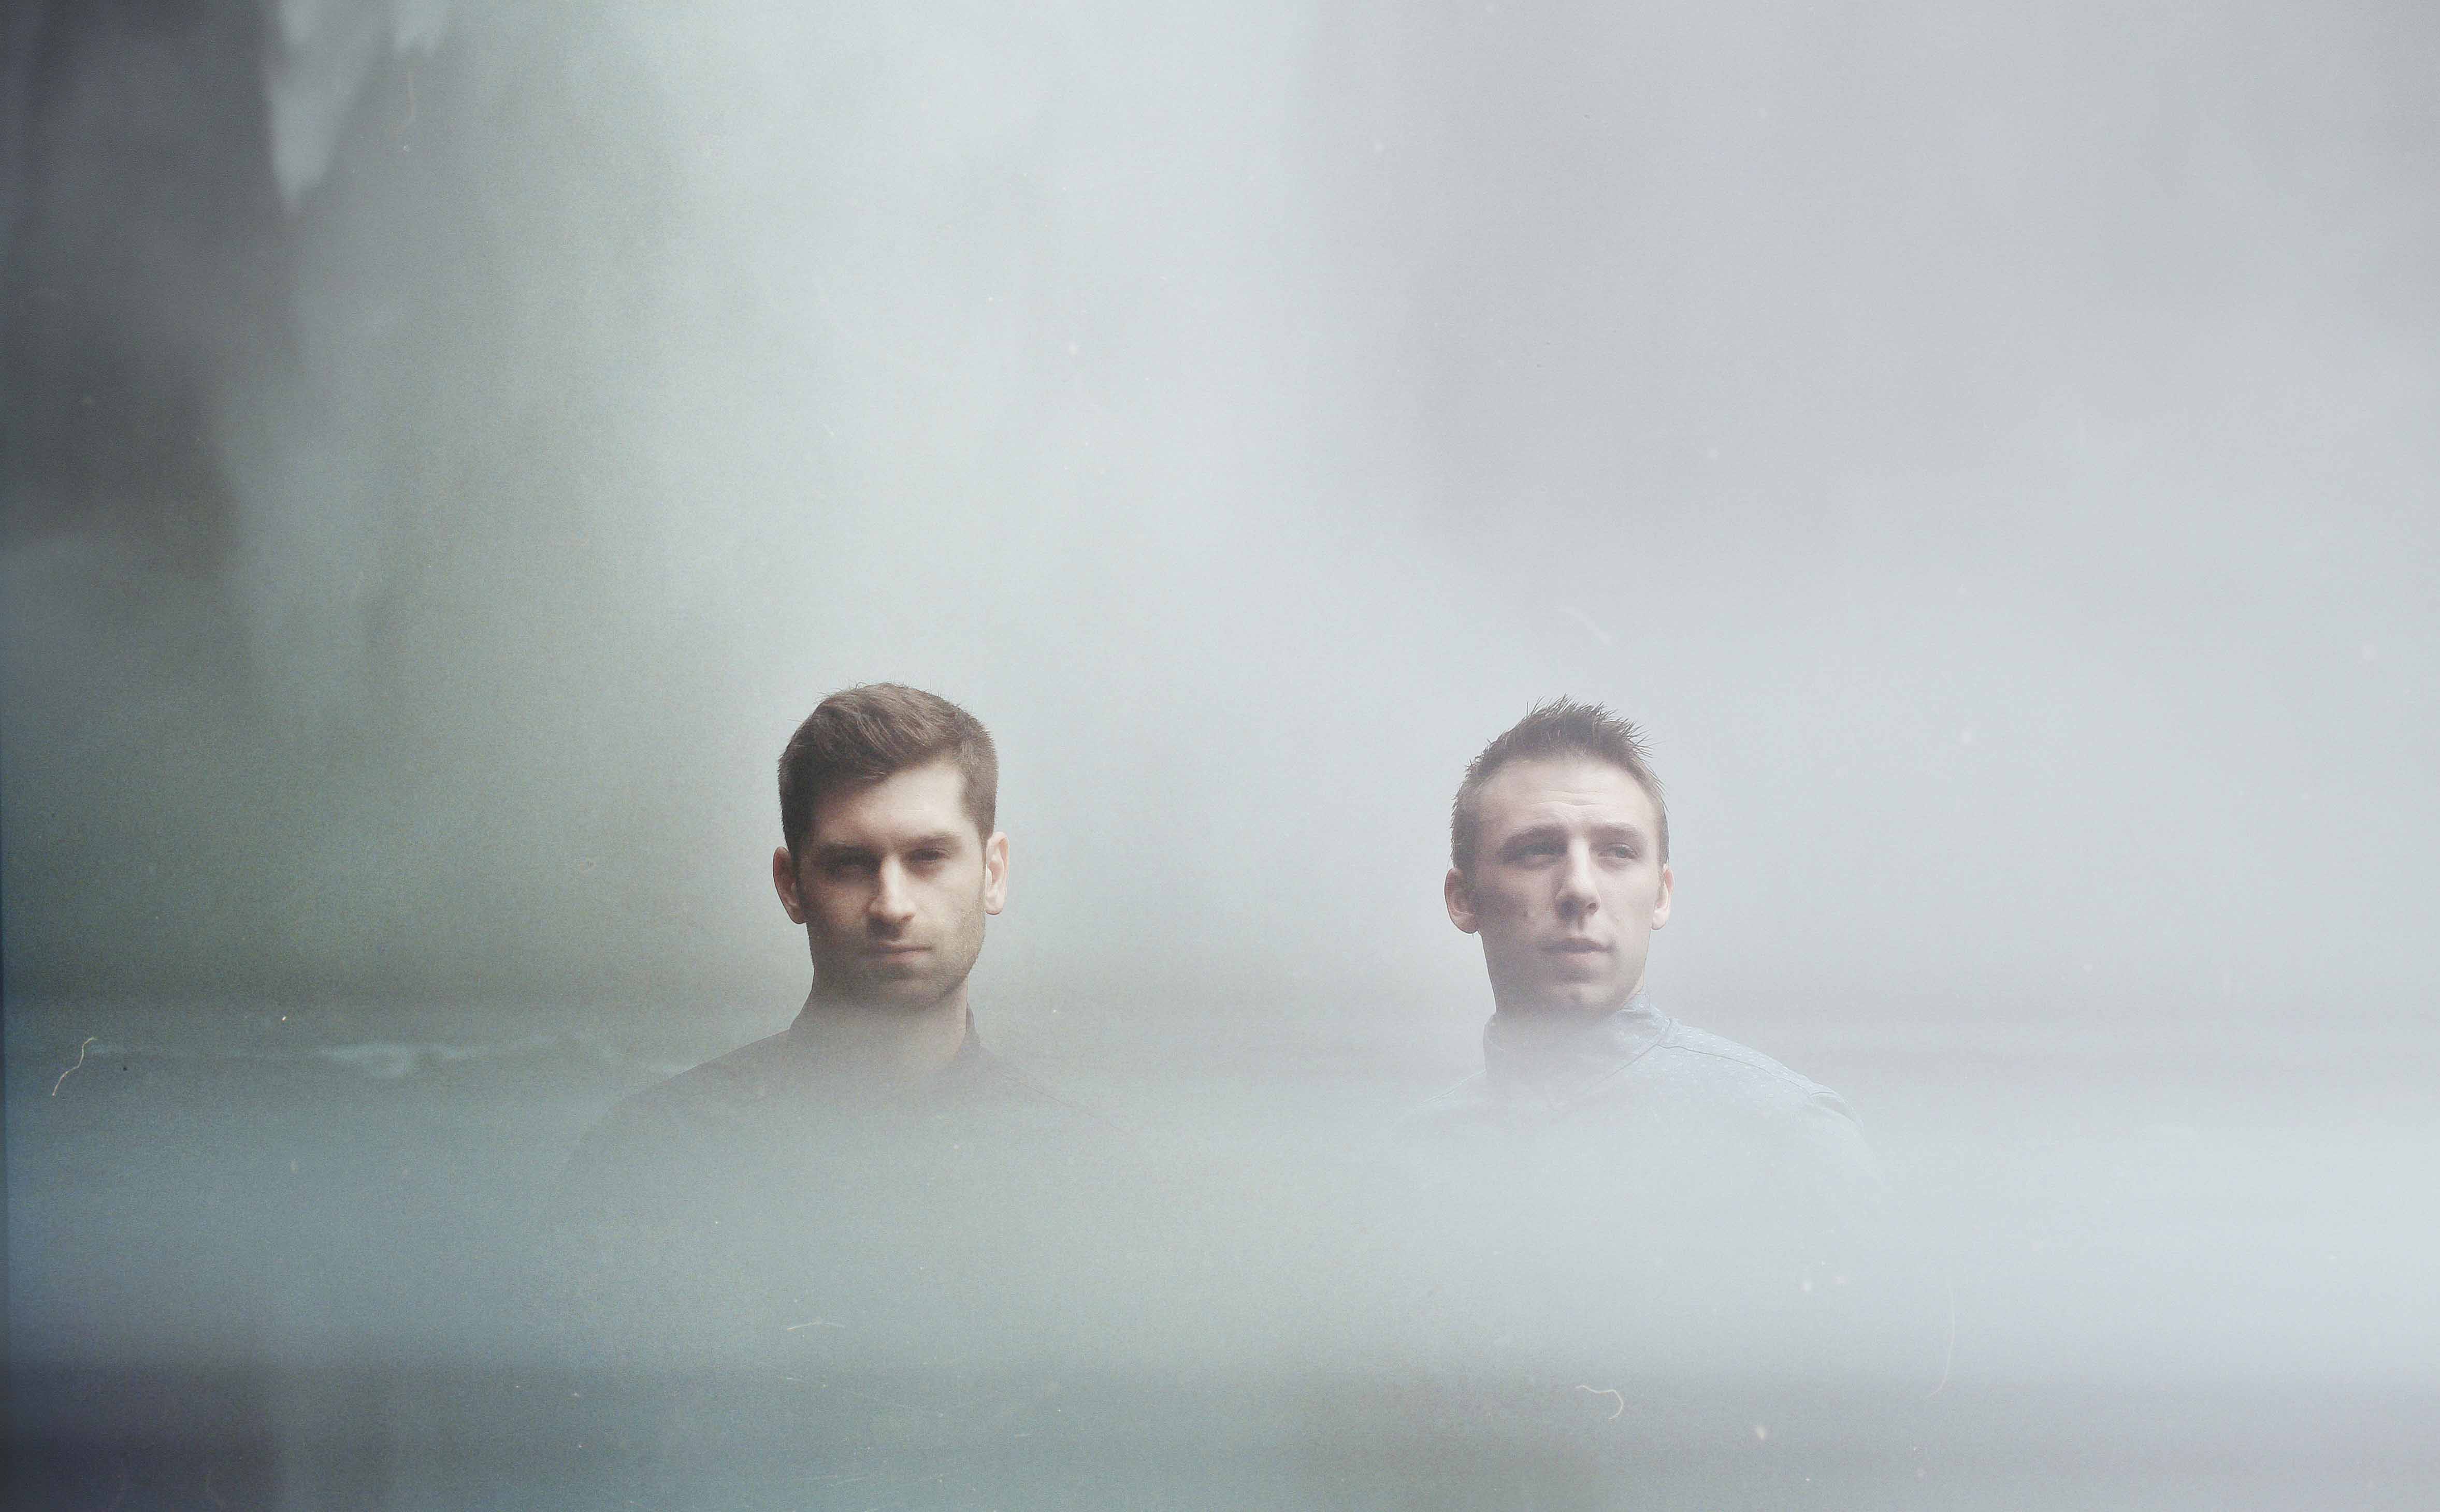 ODESZA releases 'In Return' (Deluxe Edition), their 'In Return World' Tour Begins This Month on September 24th